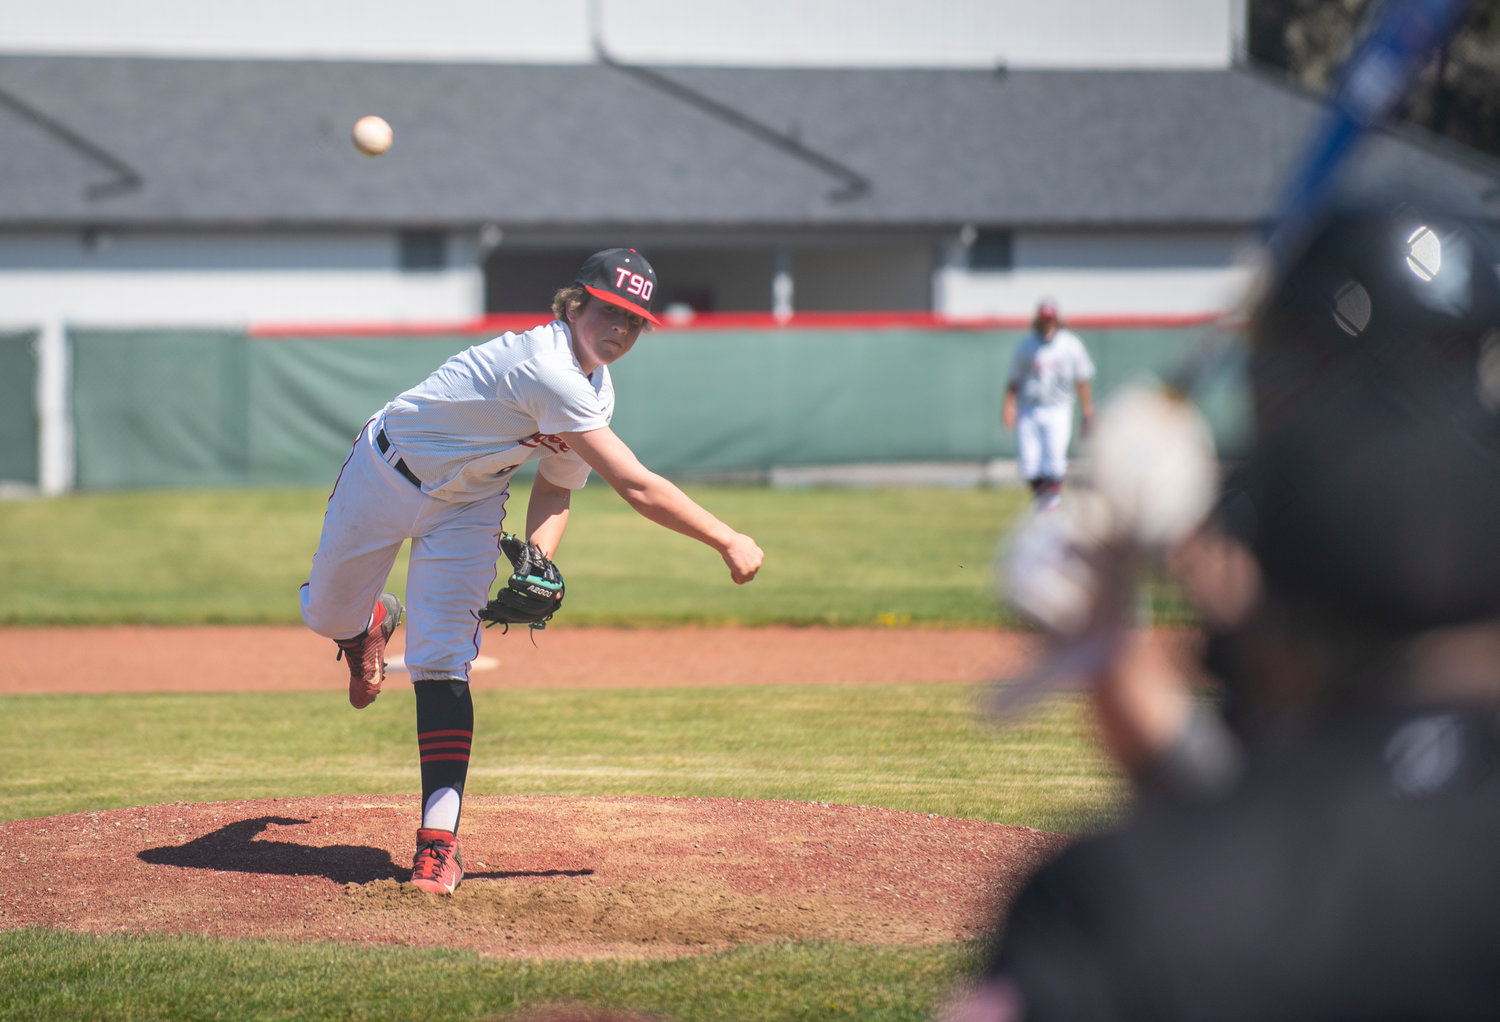 Tenino pitcher Easton Snider delivers a pitch to a Hoquiam batter on Saturday.